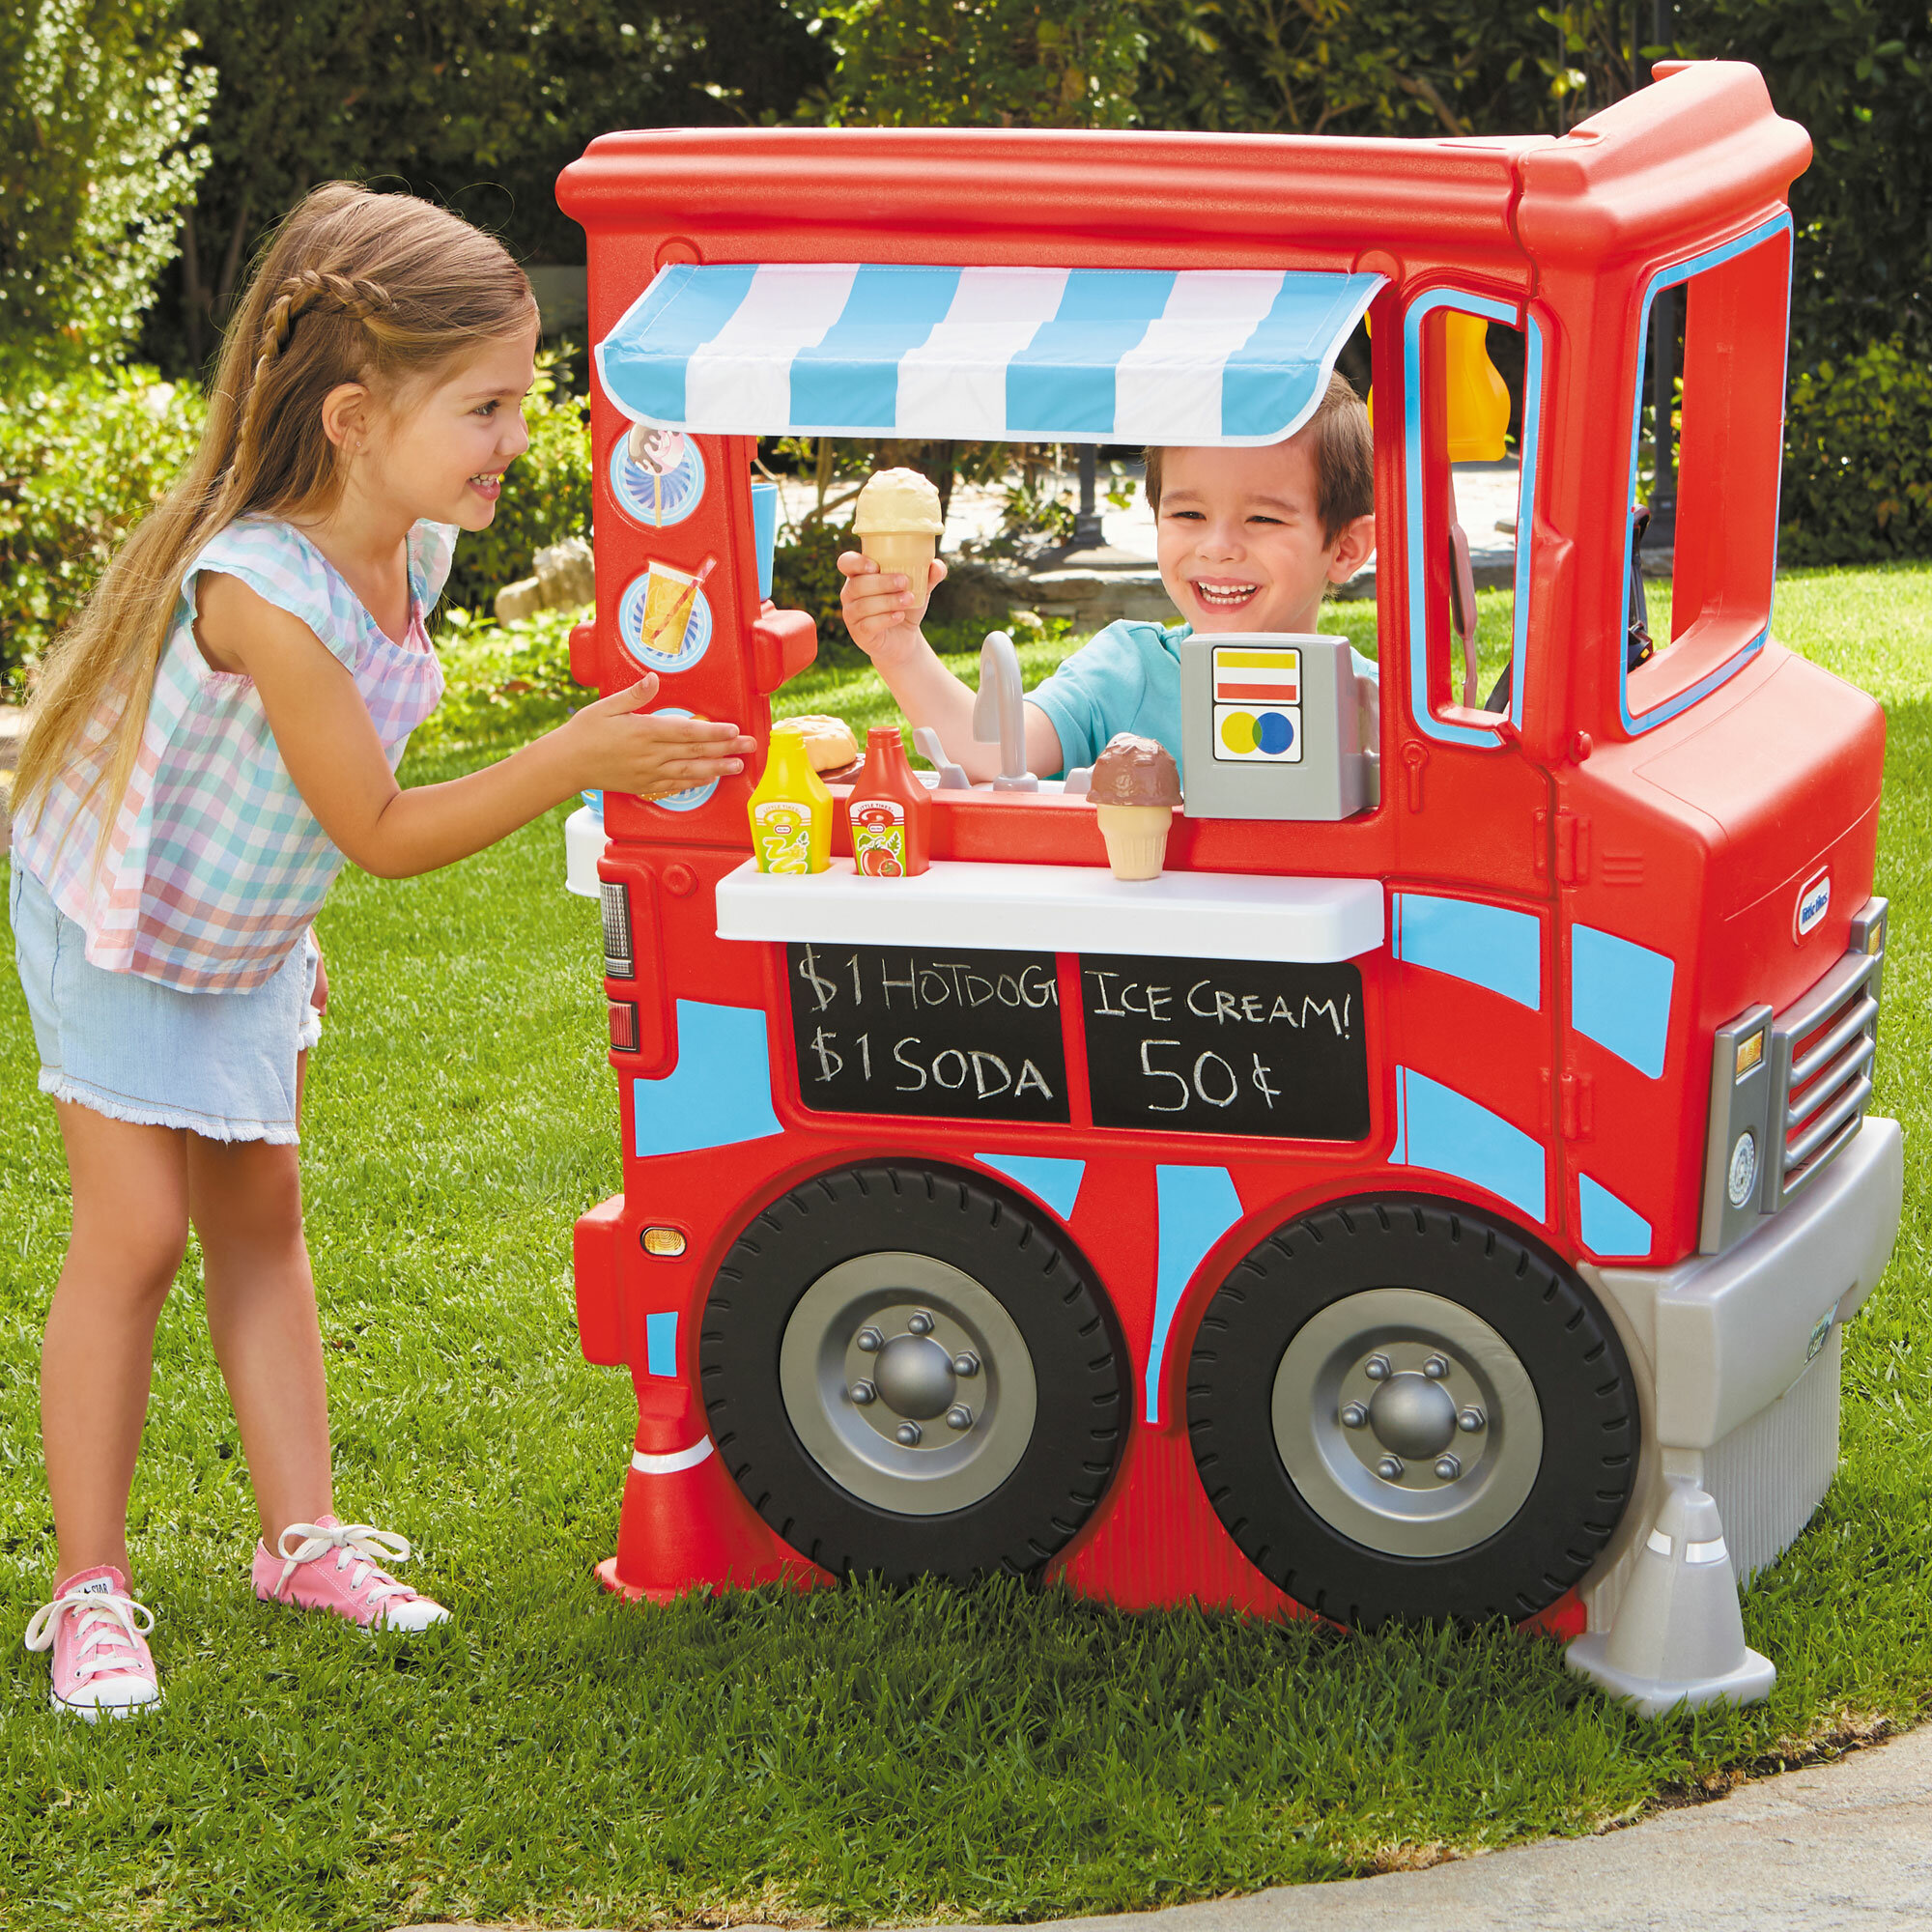 little tikes 2 in 1 food truck reviews